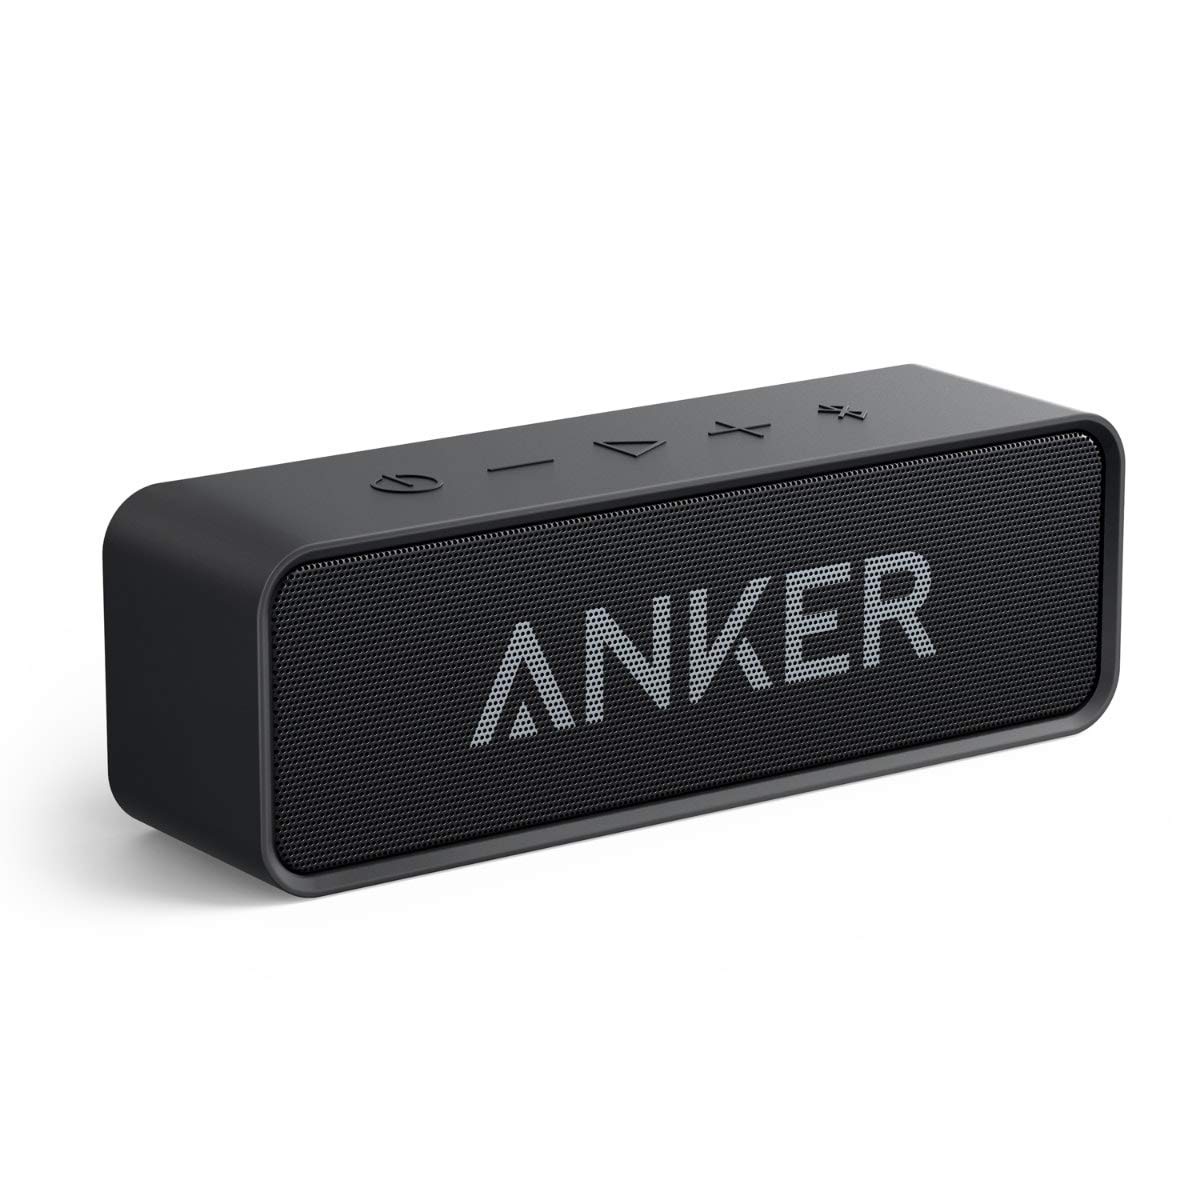 Anker SoundCore 24-Hour Playtime Bluetooth Speaker with Loud 10W Stereo Sound, Rich Bass, 66 ft Bluetooth Range, Built-in Mic. Portable Wireless Speaker for iPhone, Samsung, and More